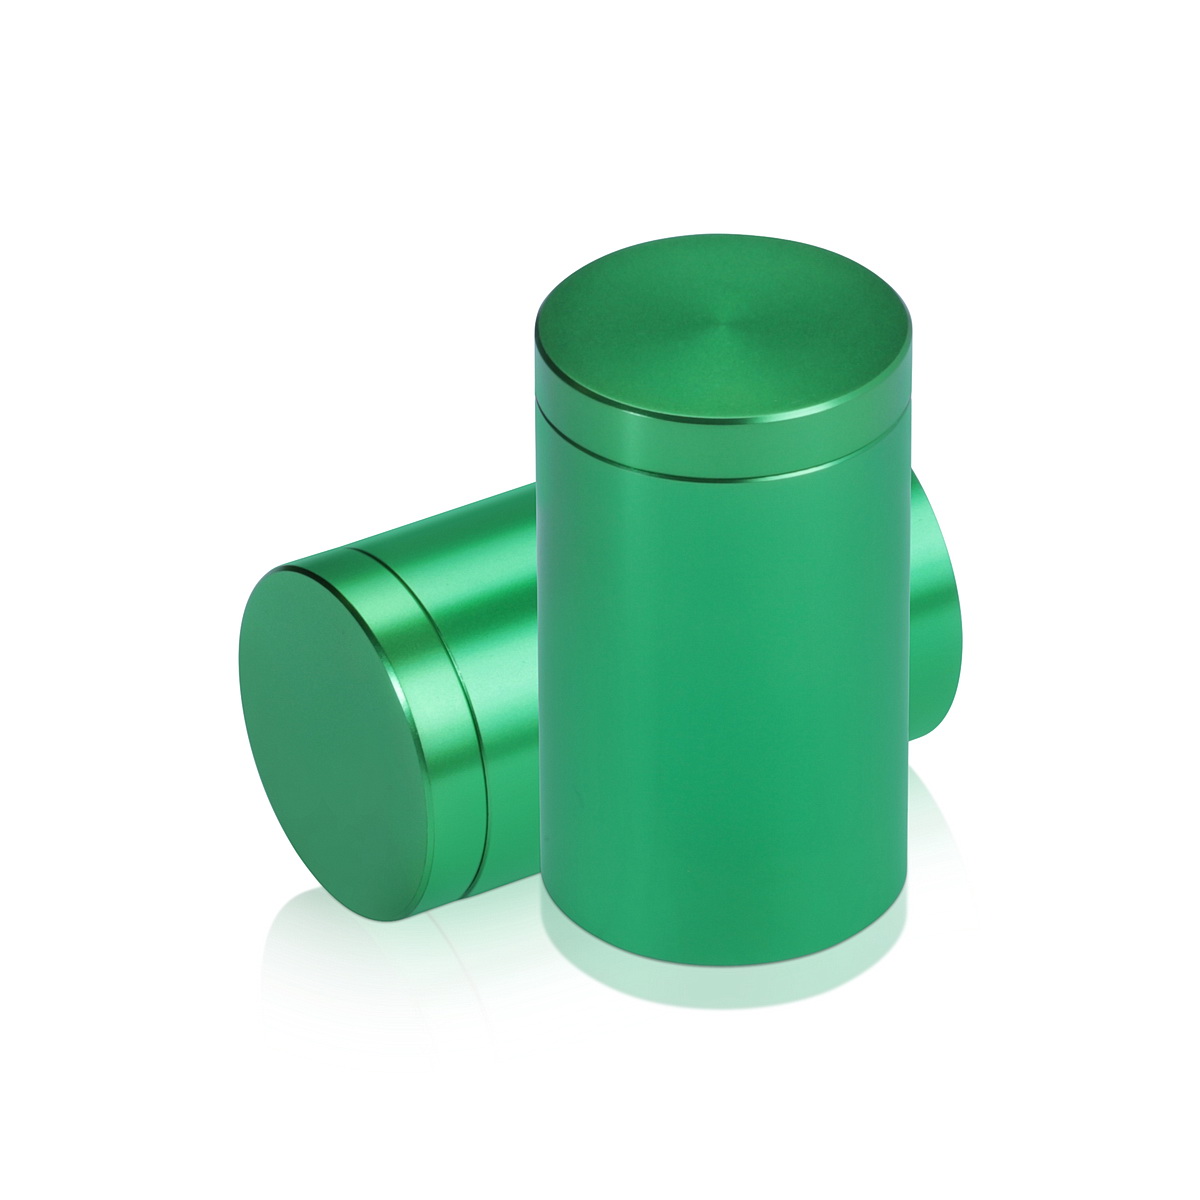 1'' Diameter X 1-1/2'' Barrel Length, Affordable Aluminum Standoffs, Green Anodized Finish Easy Fasten Standoff (For Inside / Outside use) [Required Material Hole Size: 7/16'']